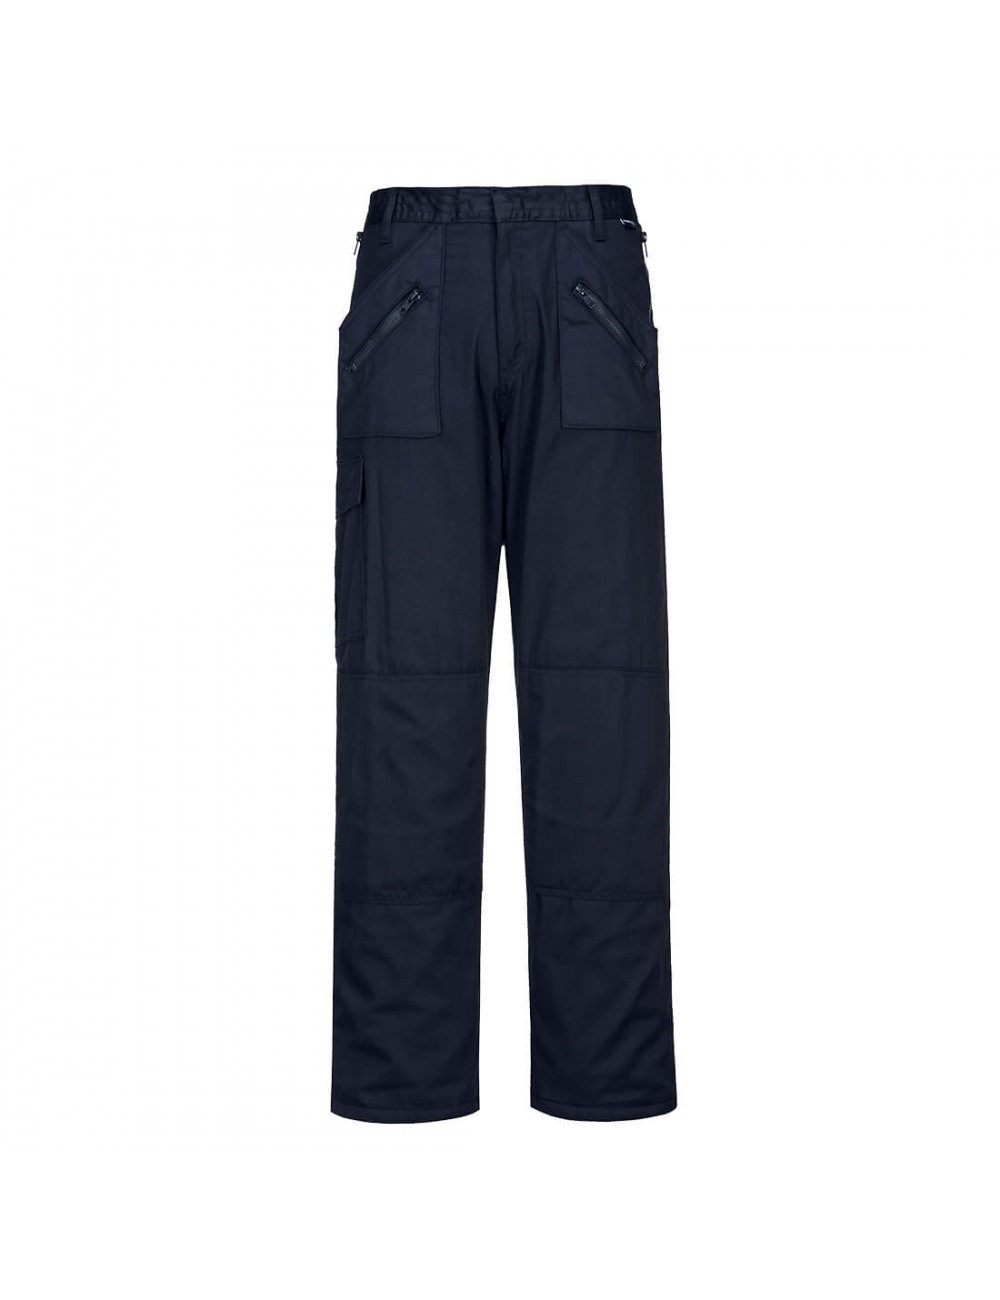 Lined action cargo trousers navy tall Portwest